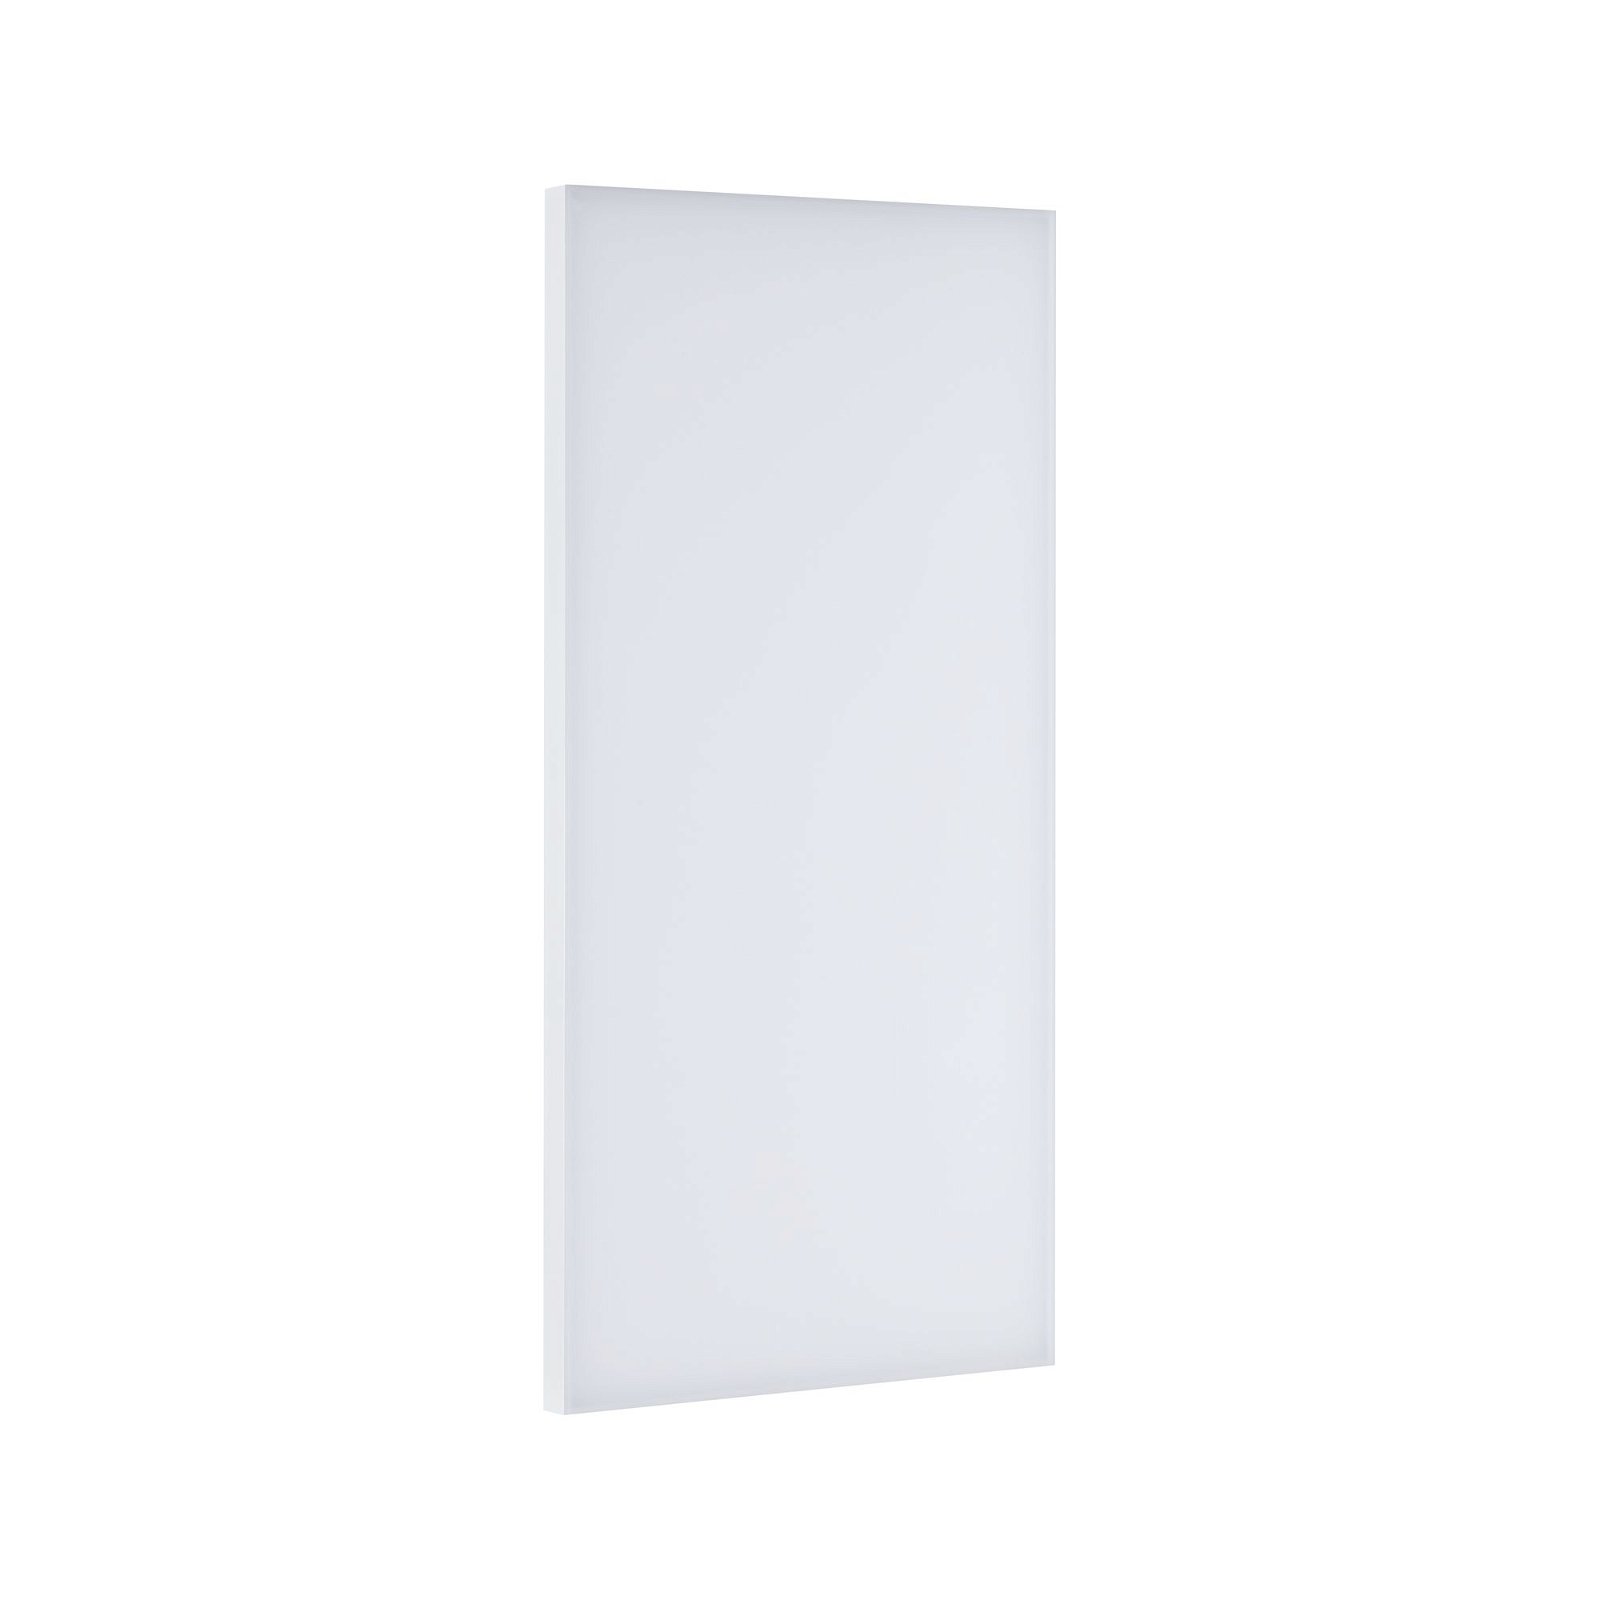 LED Panel Smart Home Zigbee 3.0 Velora square 595x295mm 15,5W 1600lm Tunable White Matt white dimmable